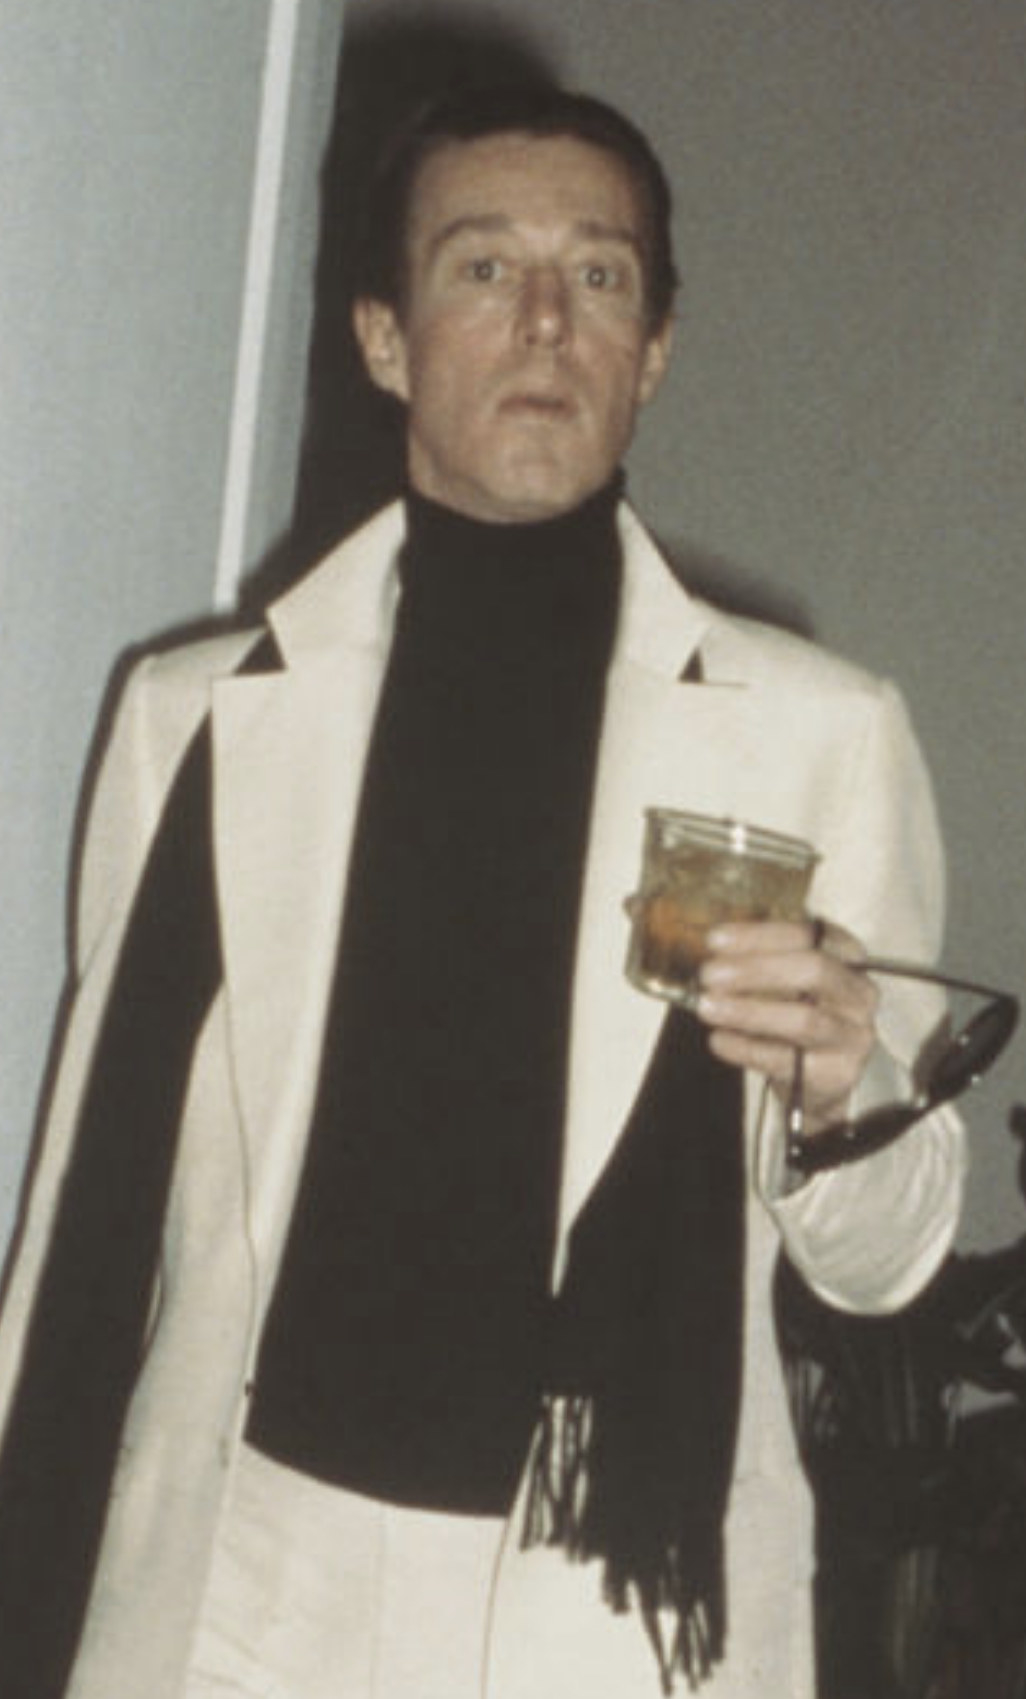 Halston holding a cocktail while wearing a long scarf and matching suit/coat